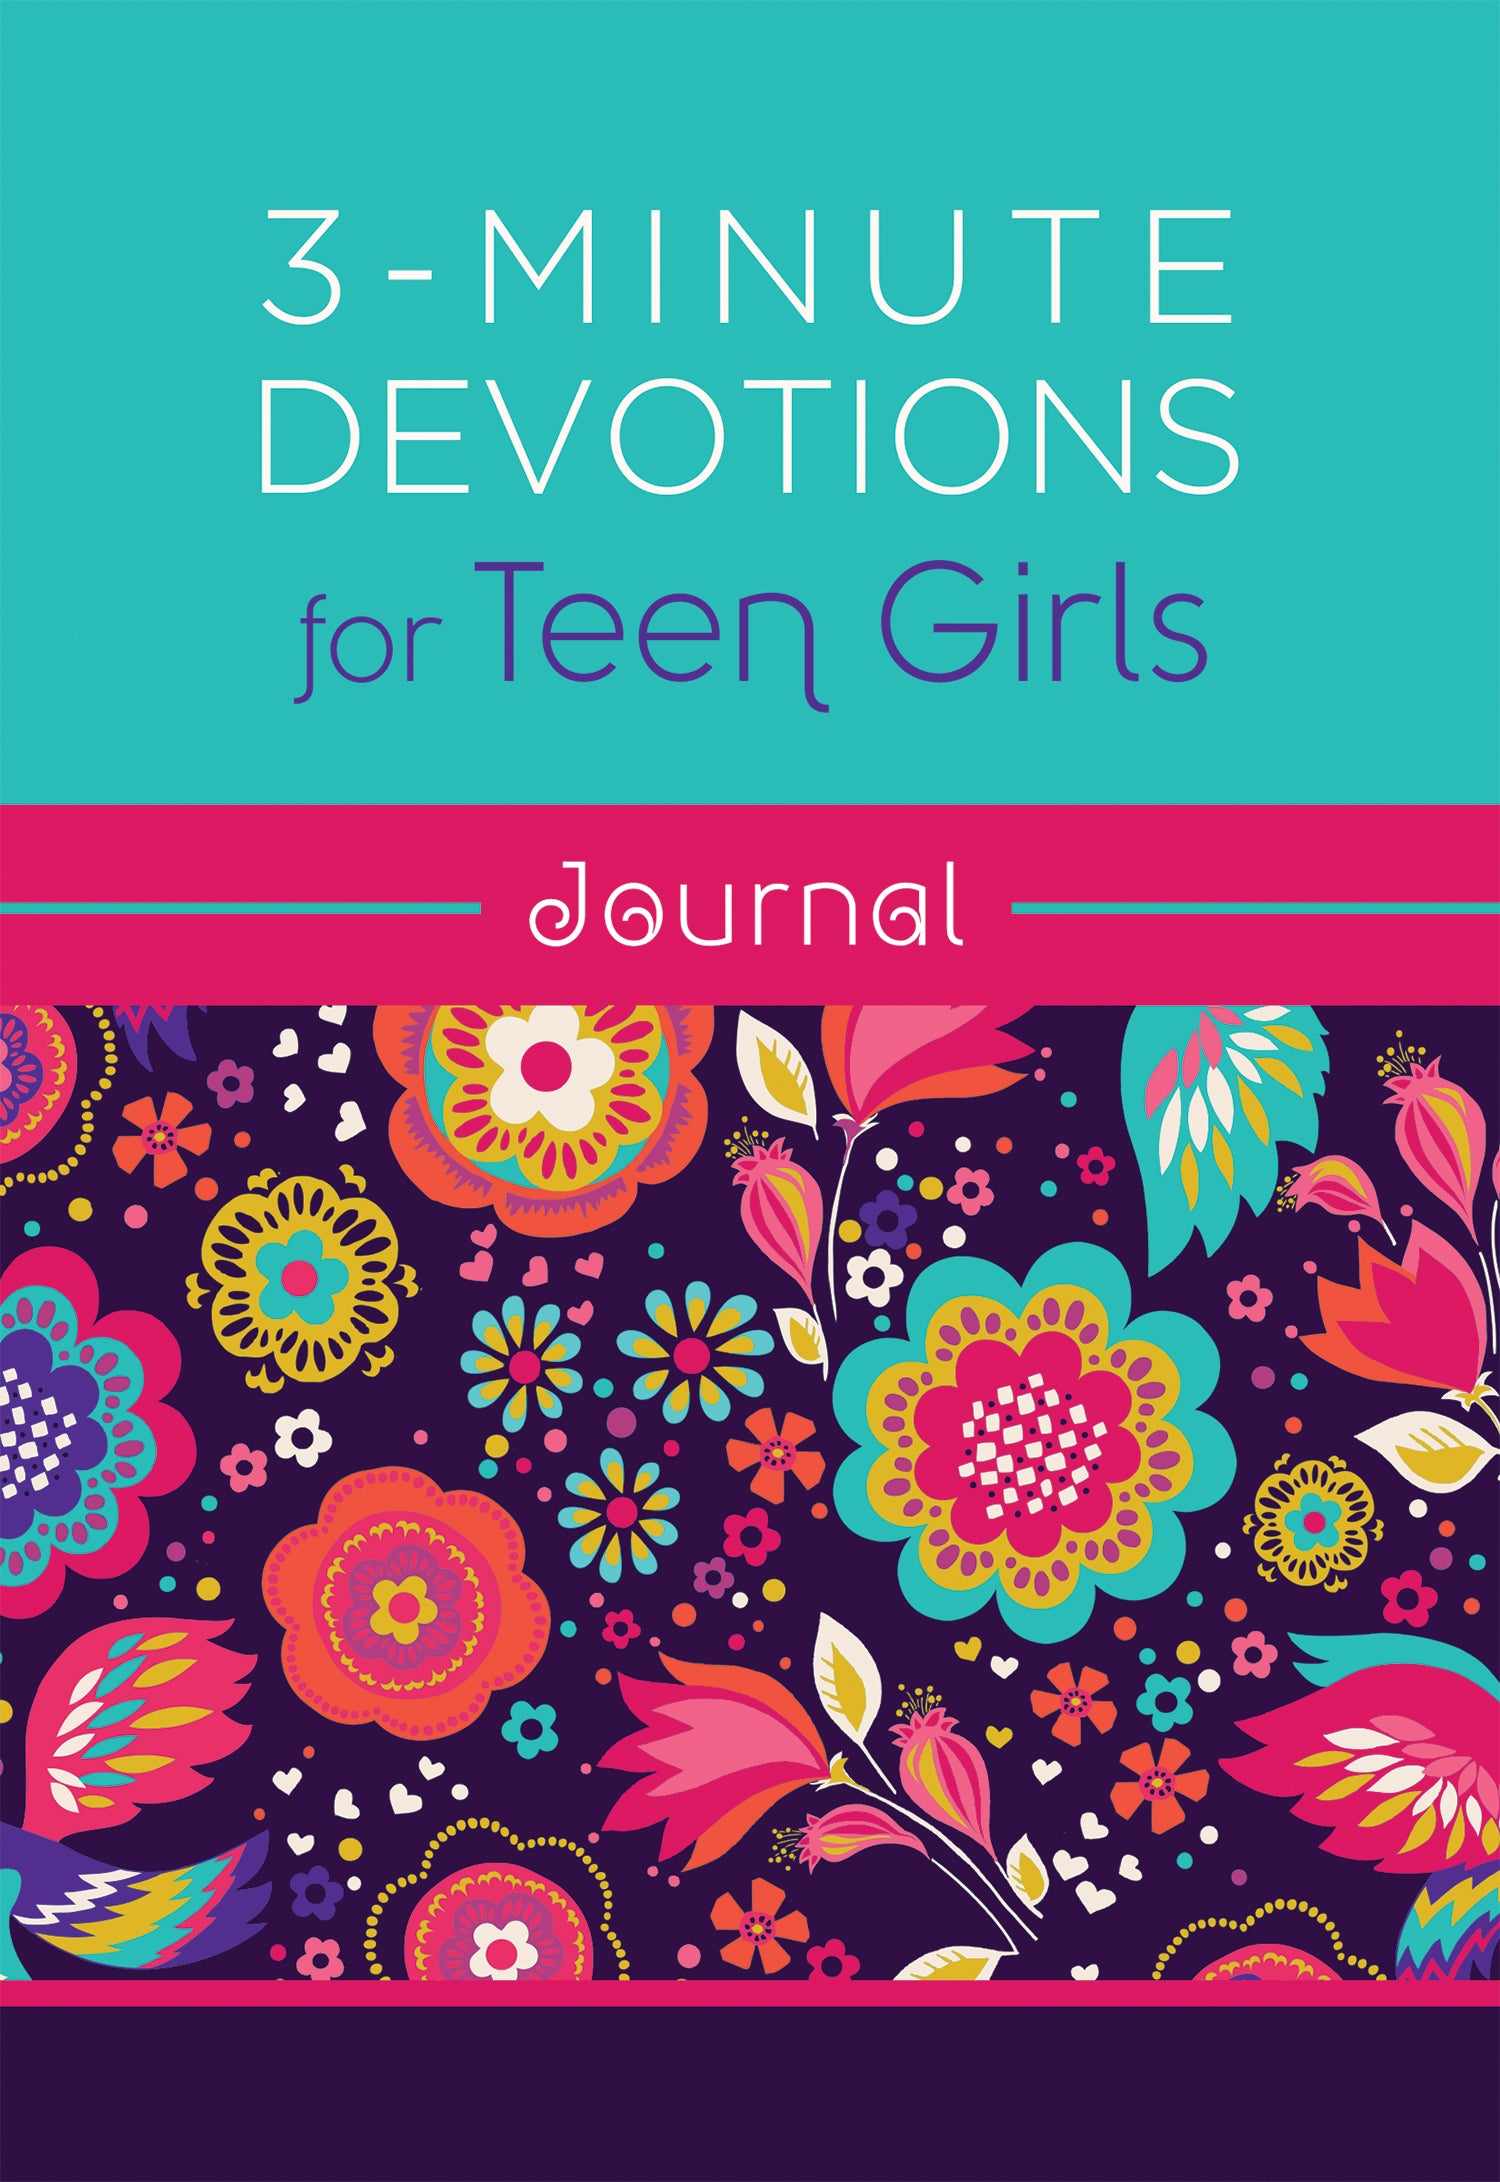 Image of 3-Minute Devotions for Teen Girls Journal other